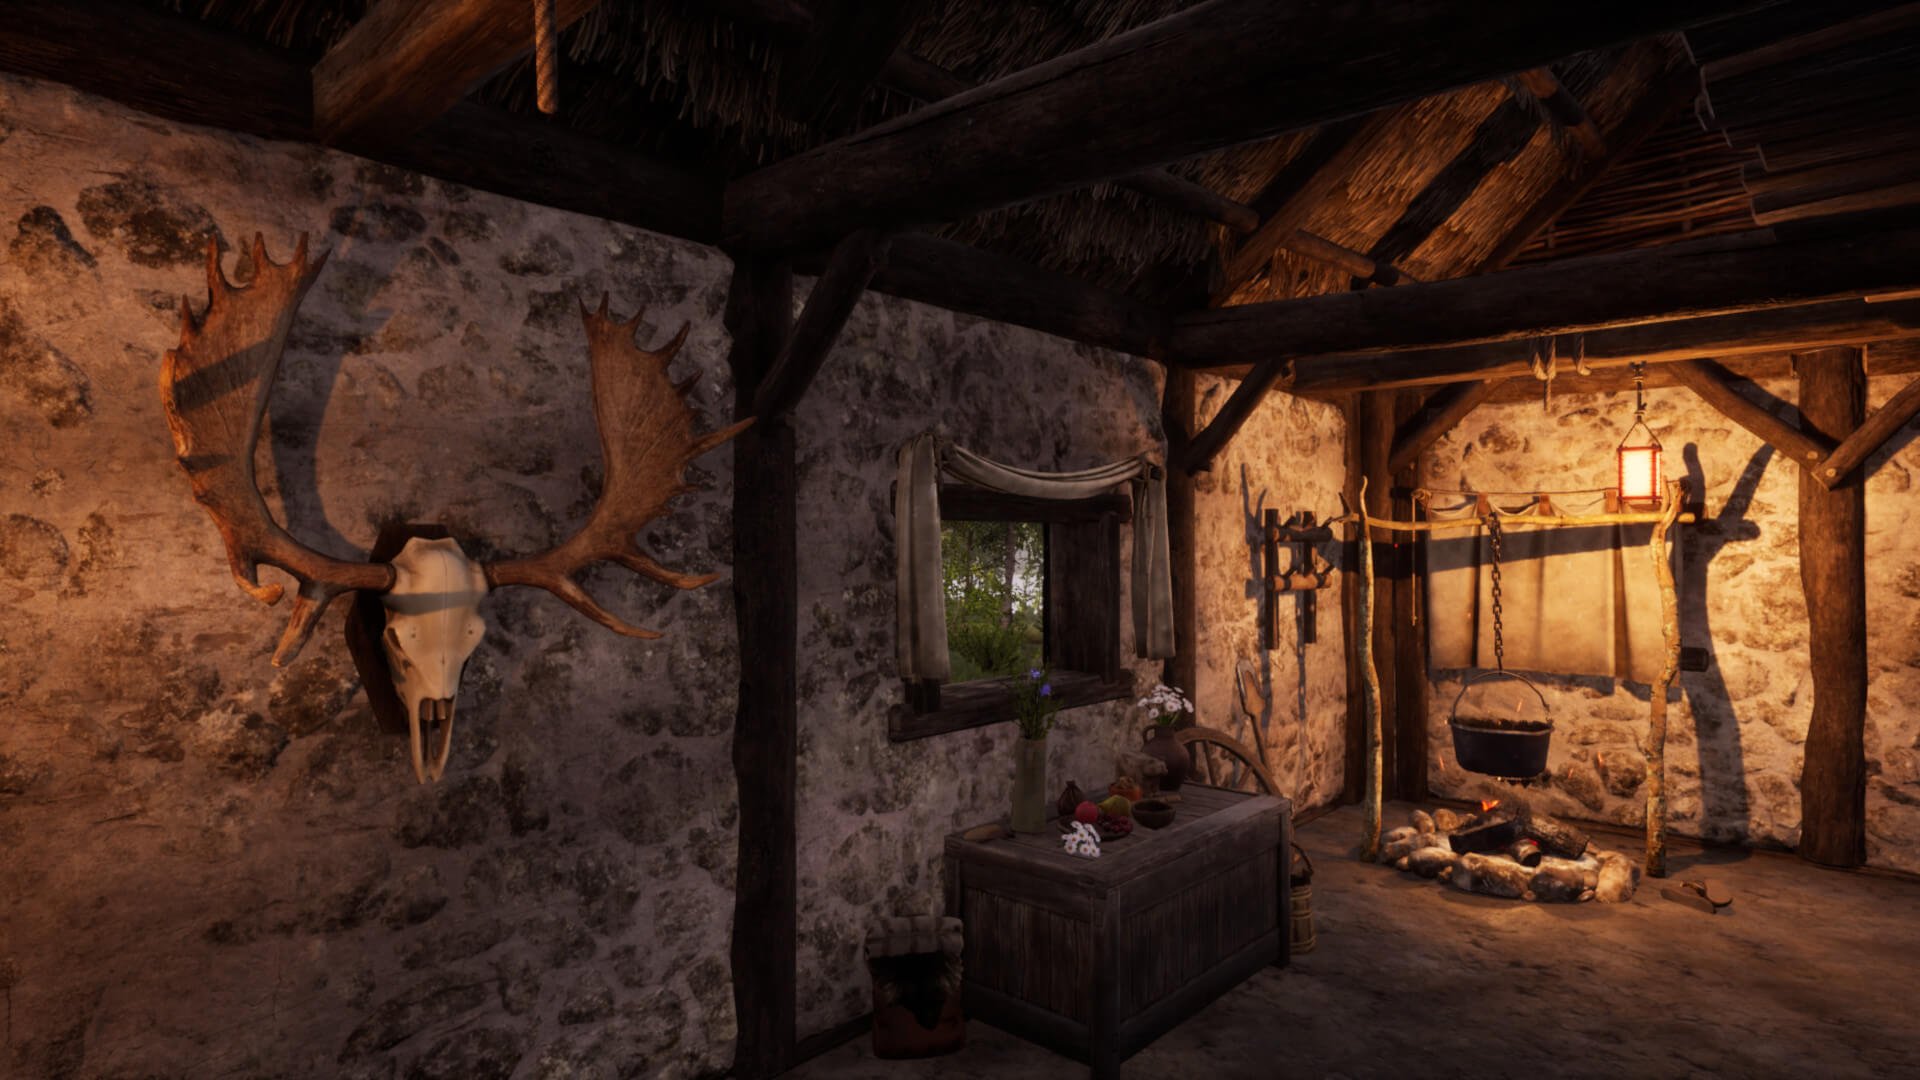 A trophy on the wall in the latest Medieval Dynasty update